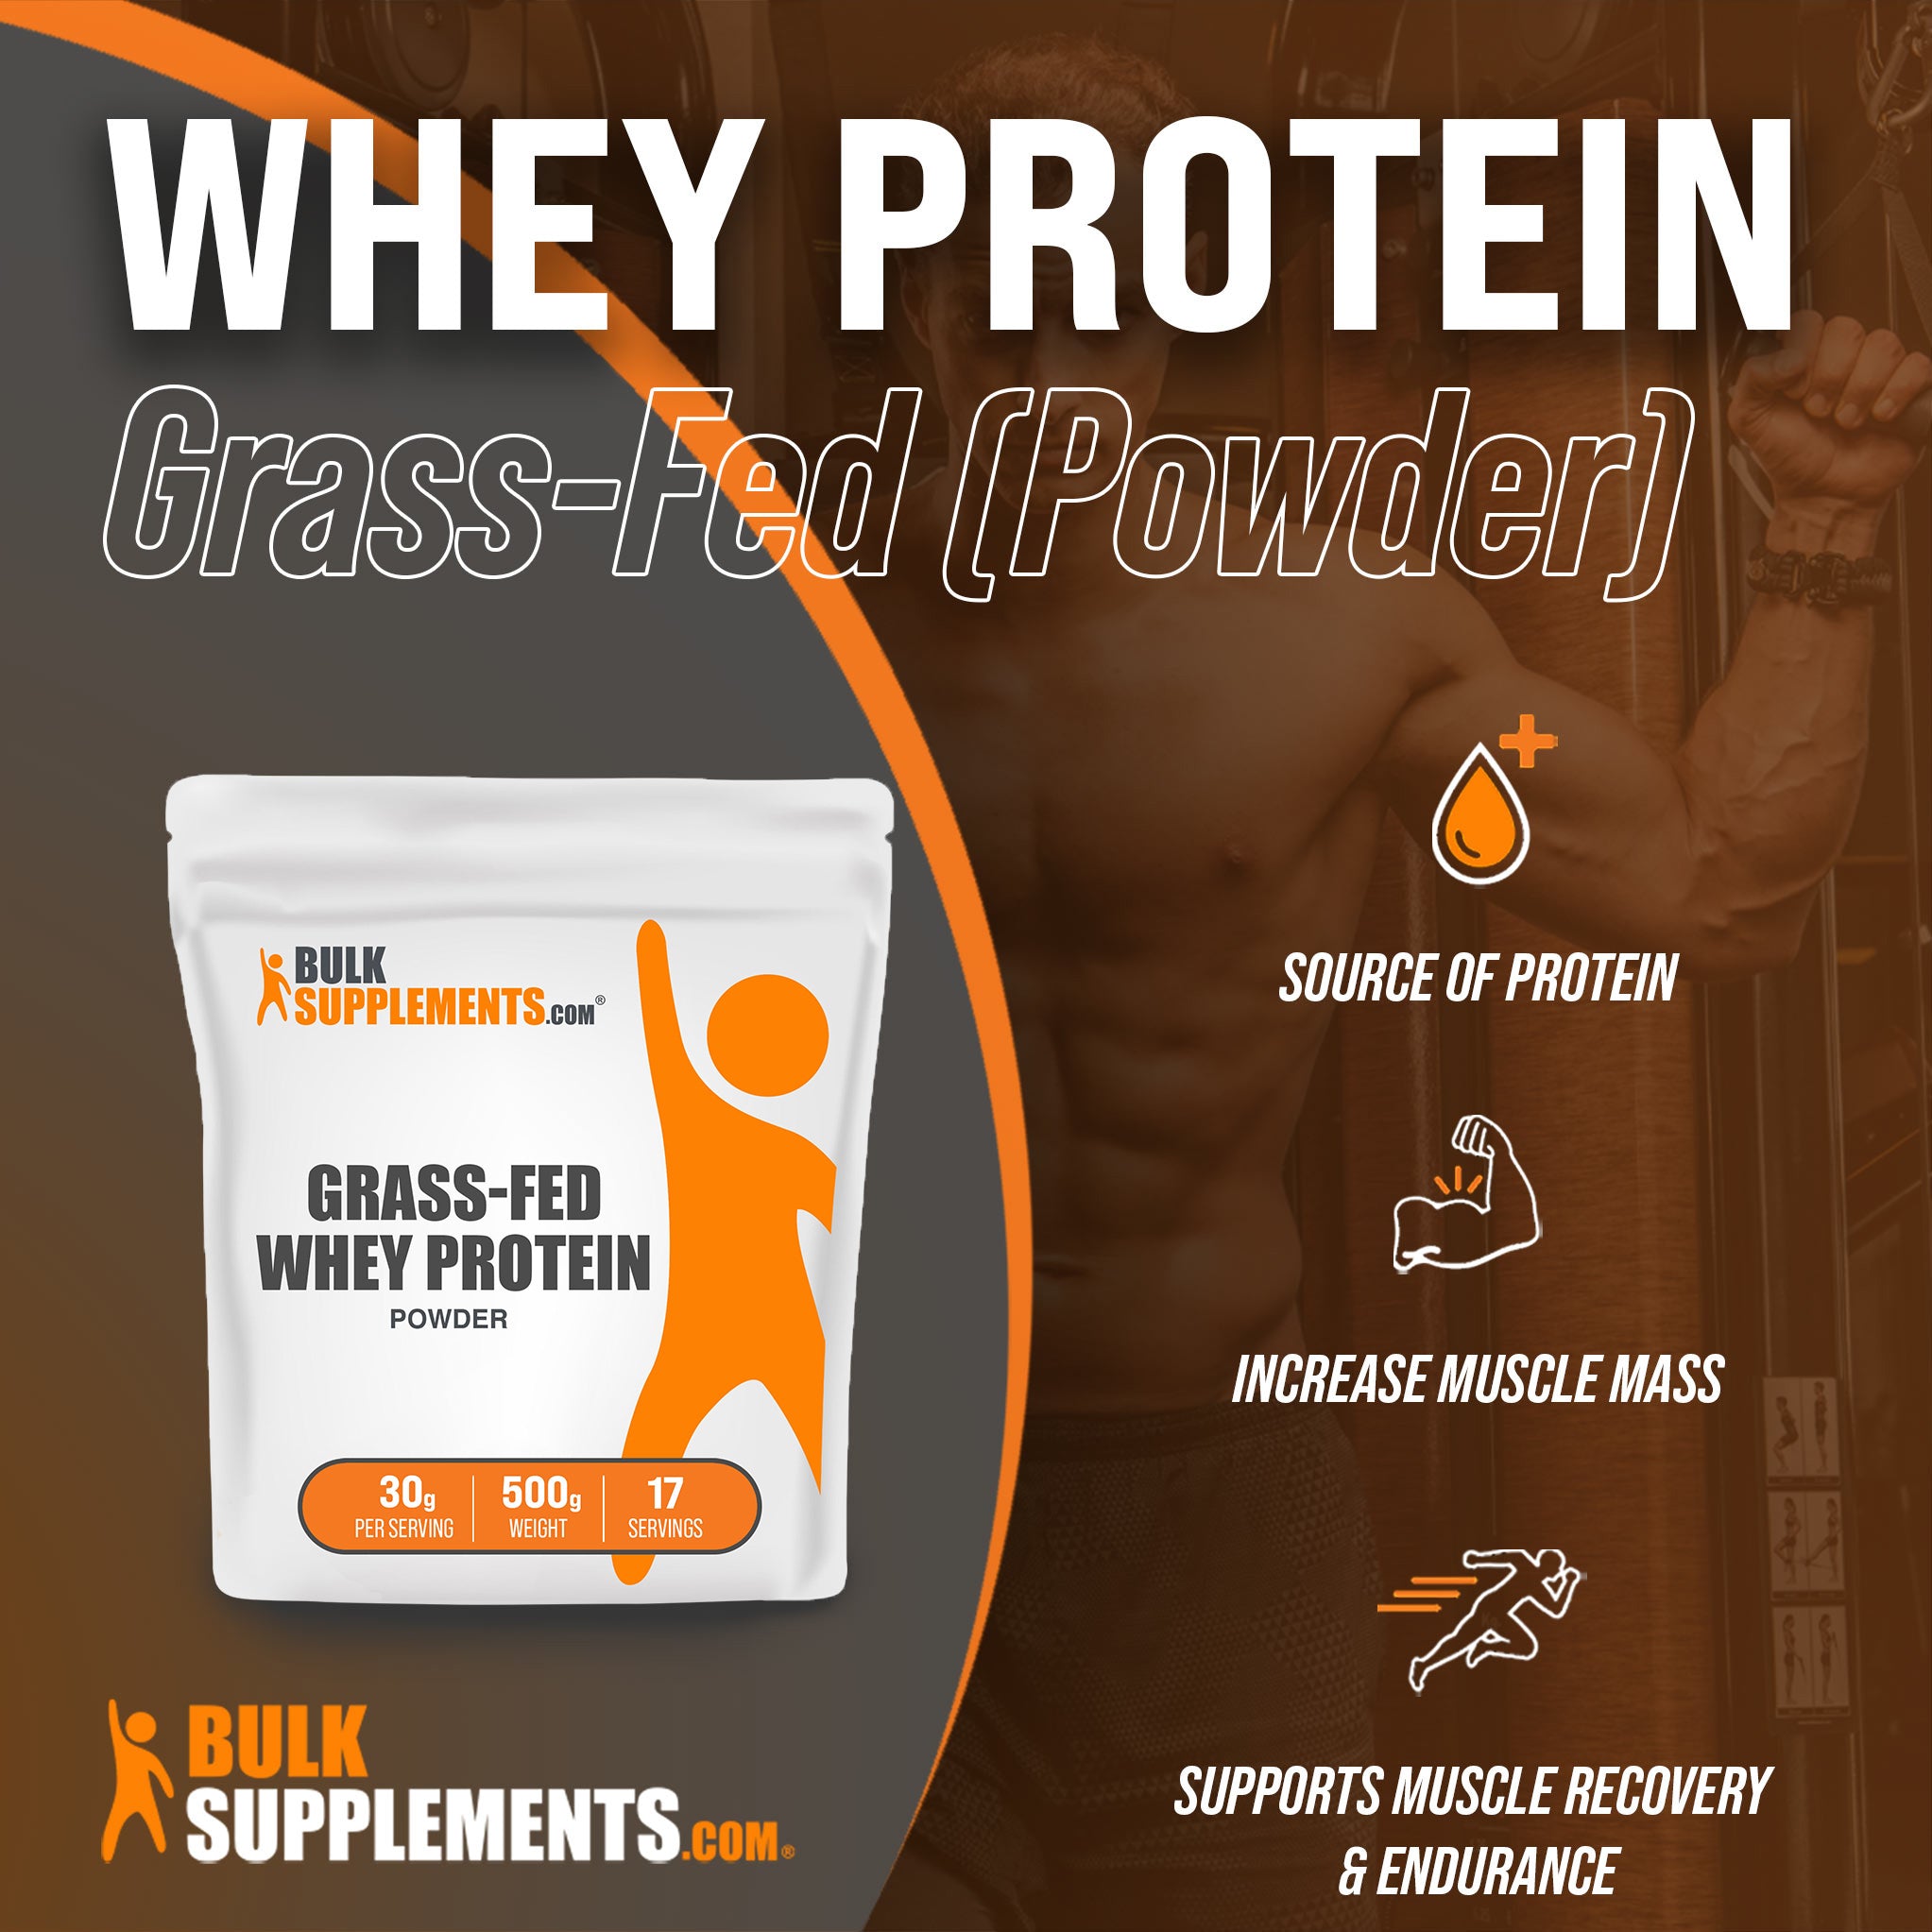 Benefits of Grass-Fed Whey Protein; source of protein, increase muscle mass, supports muscle recovery and endurance